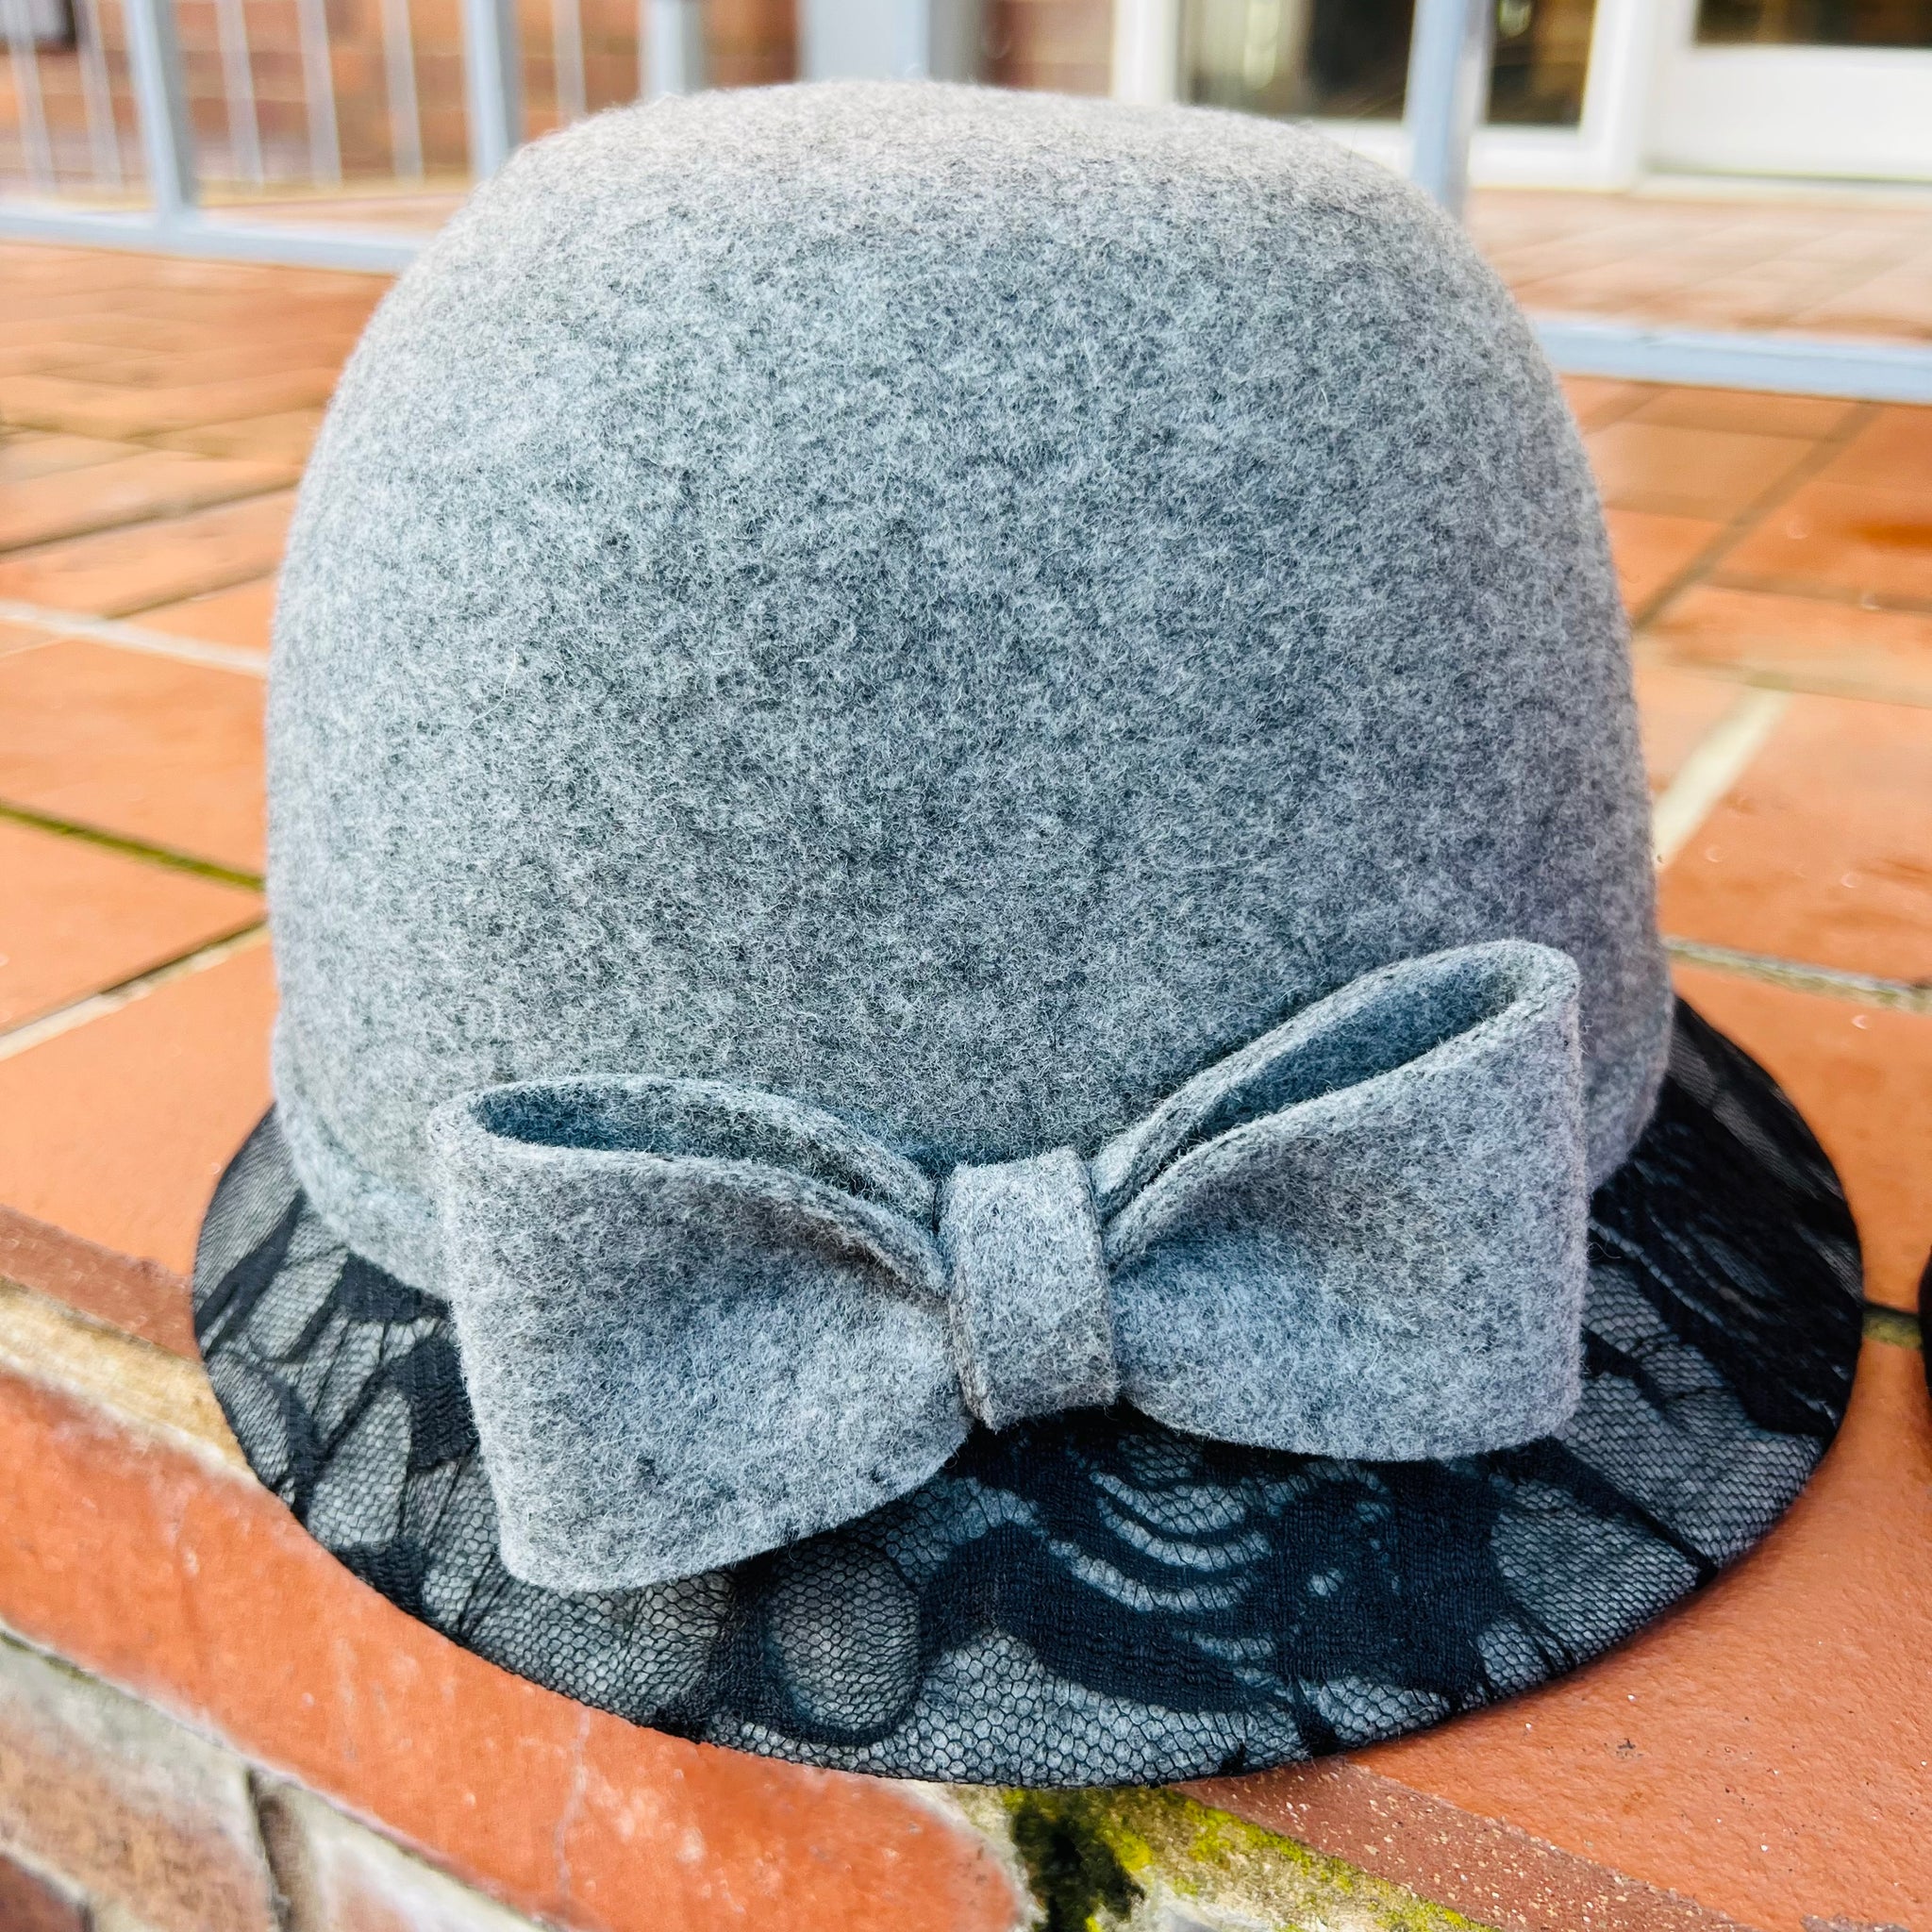 Wool Cloche Hat With Lace Covered Brim